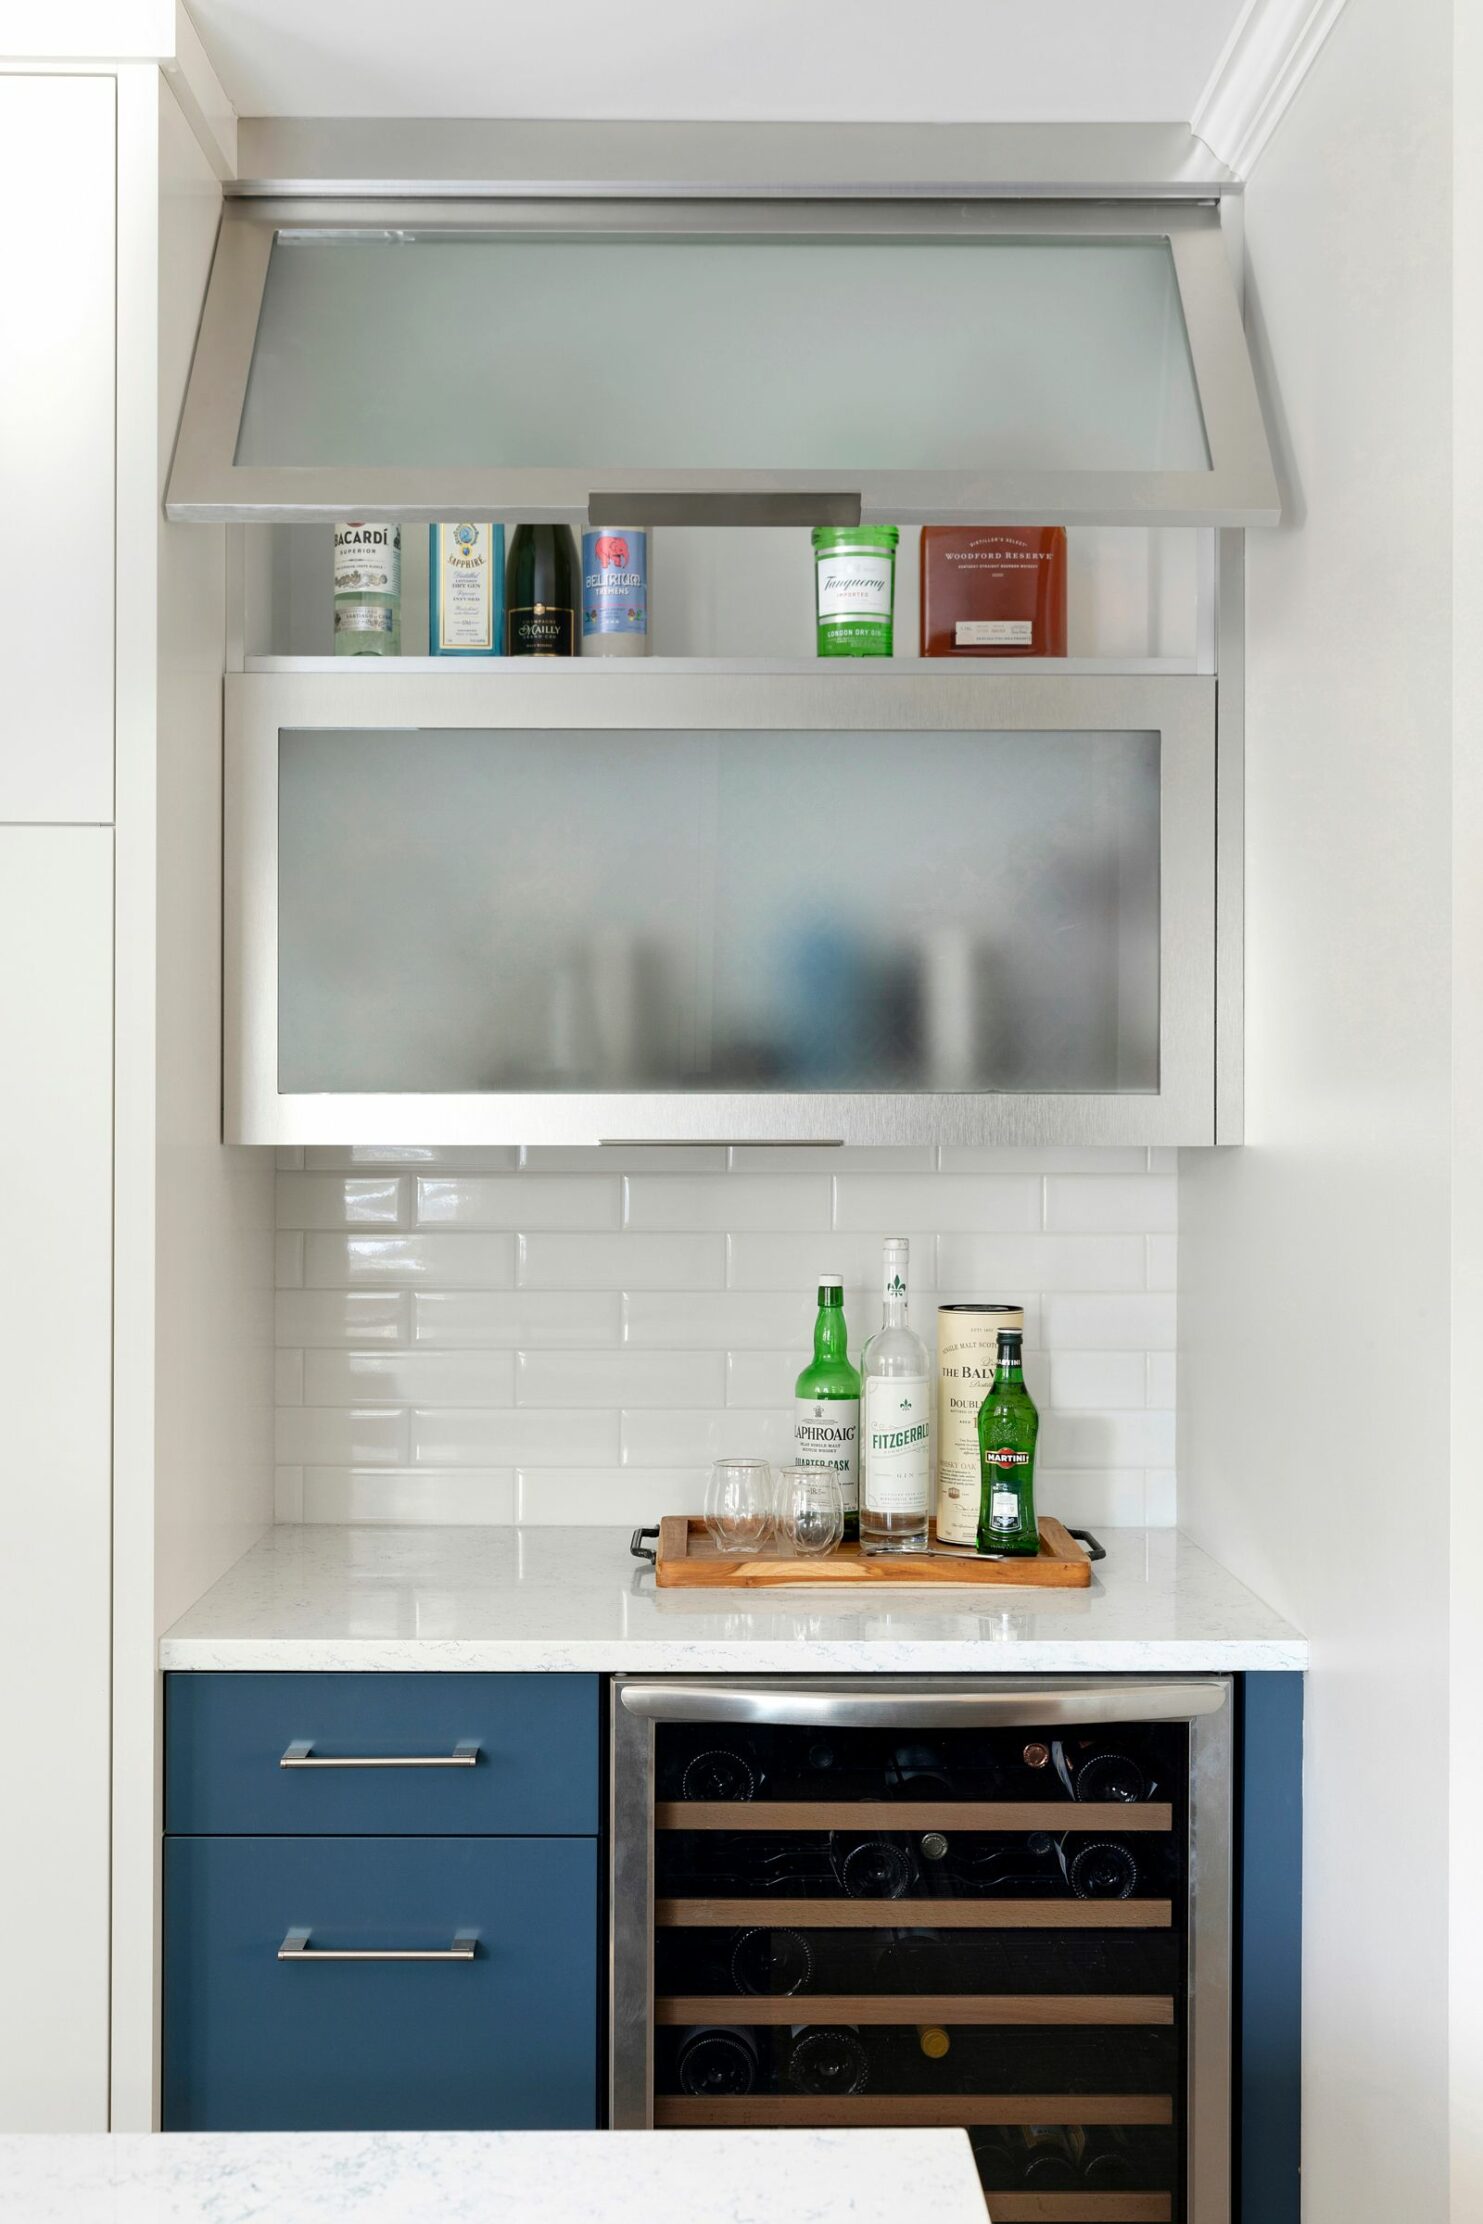 Wet bar and organizational system in a kitchen remodel